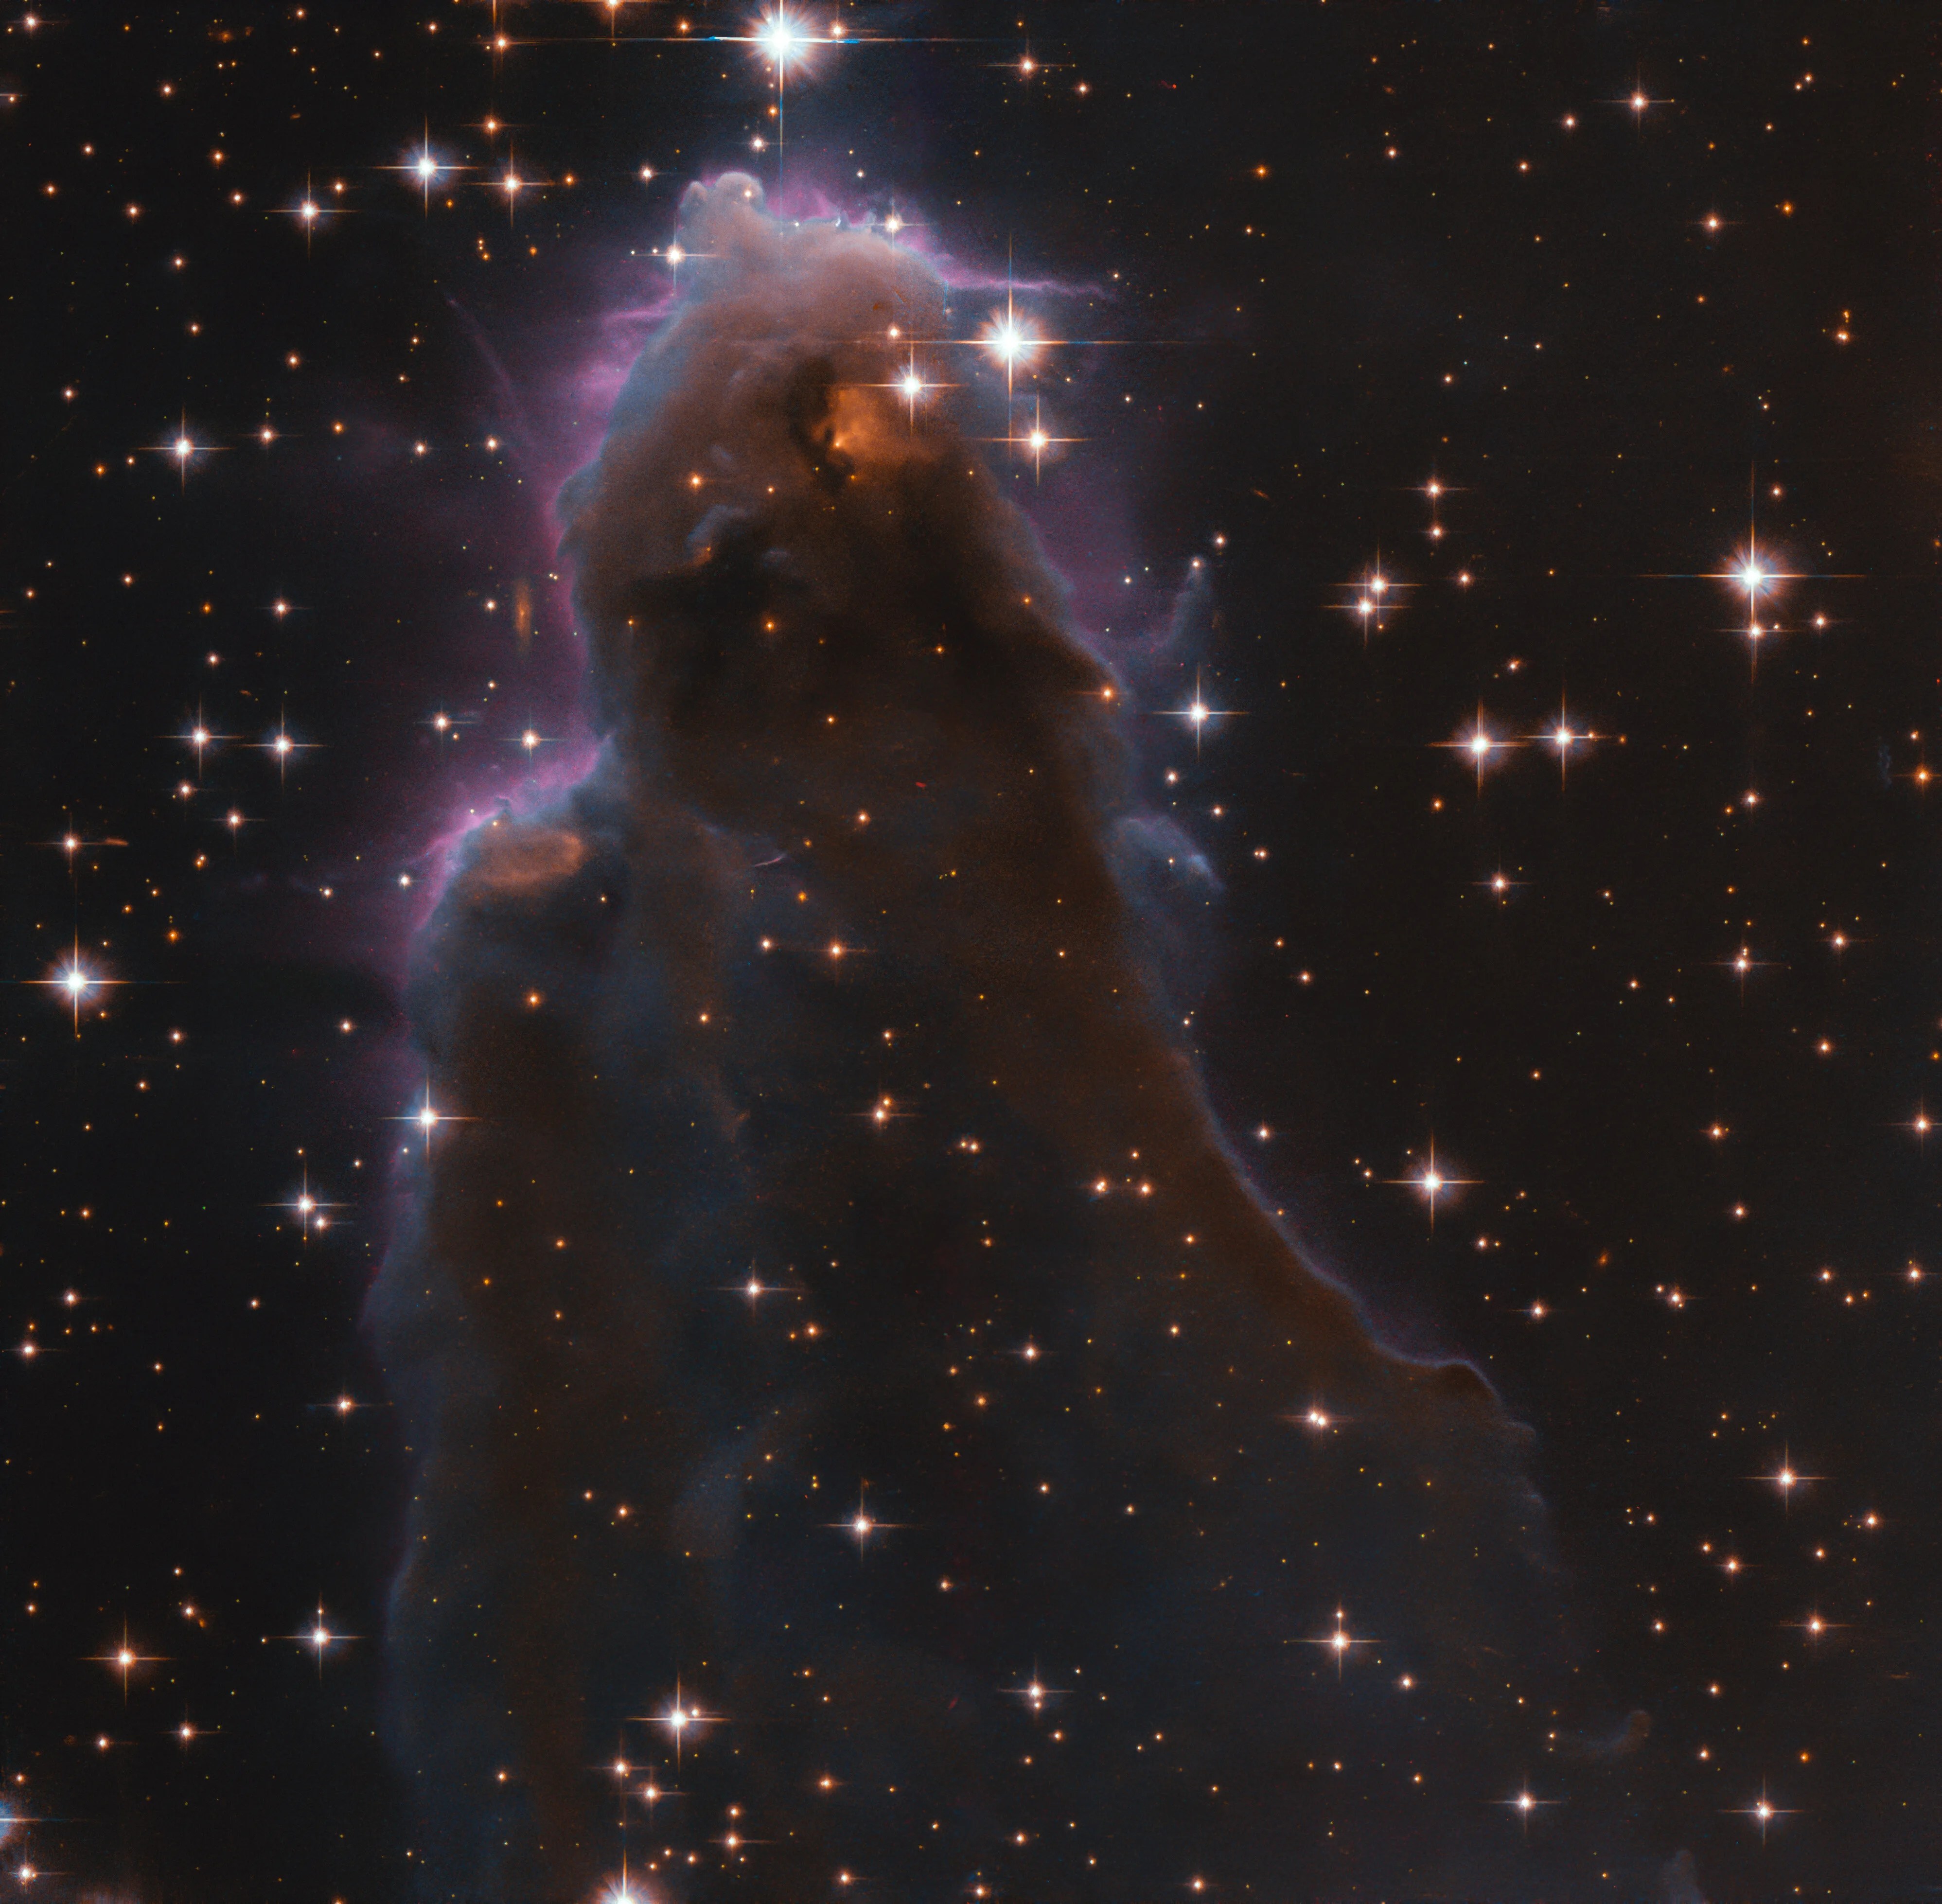 Whisp-like, purple-hued view of star-forming region j025157.5+600606 against black backdrop of space, as seen by hubble